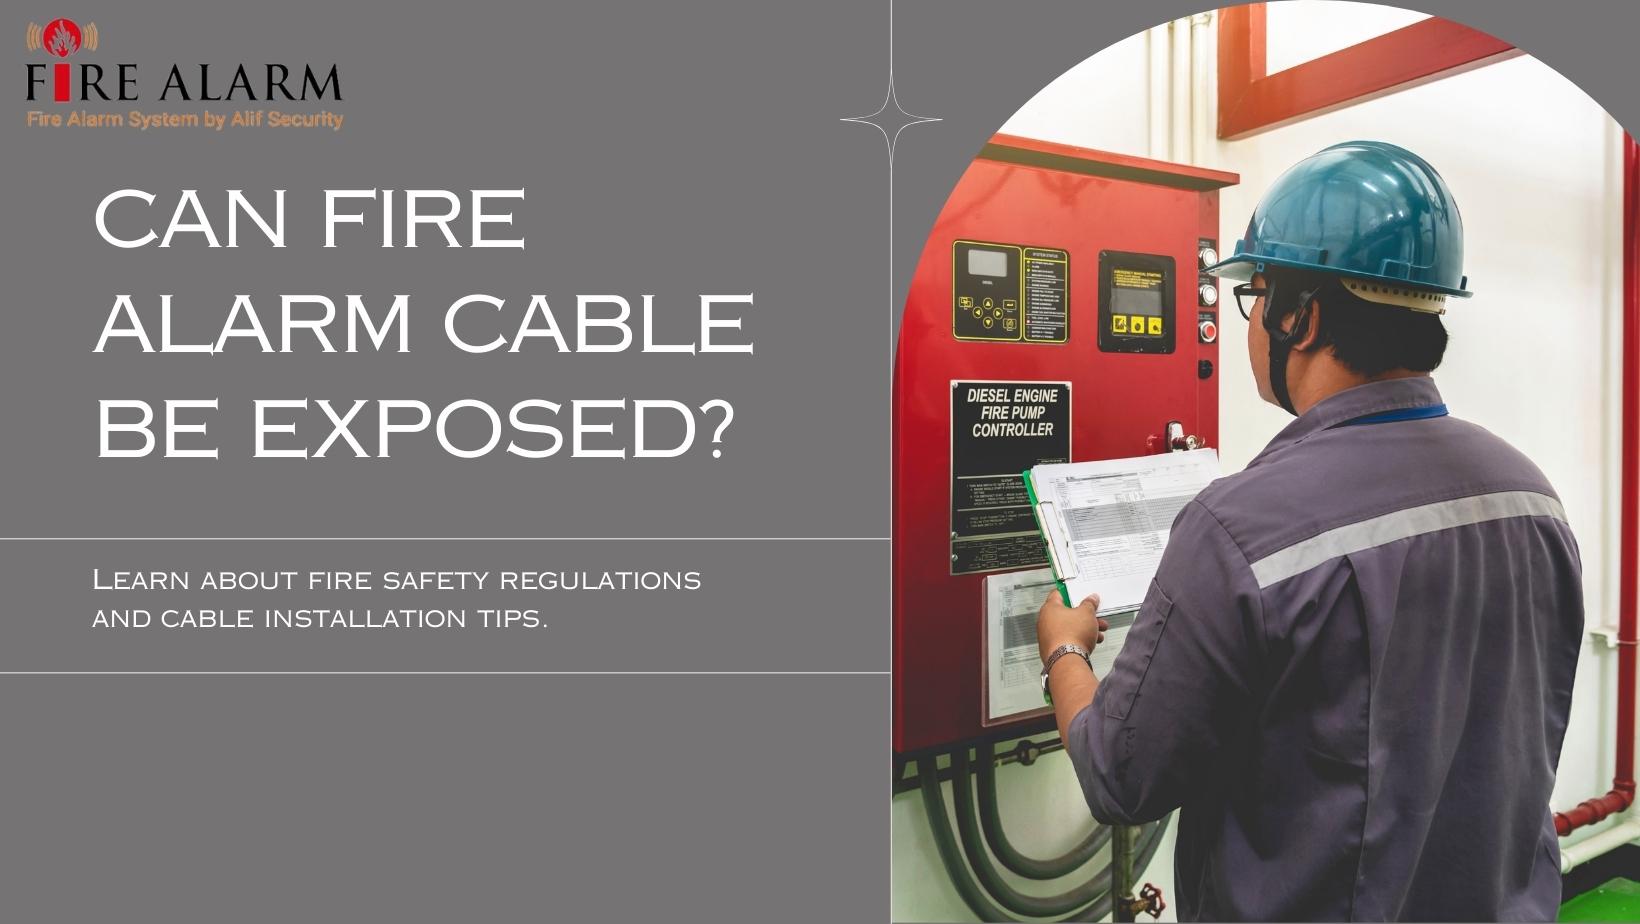 Can fire alarm cable be exposed